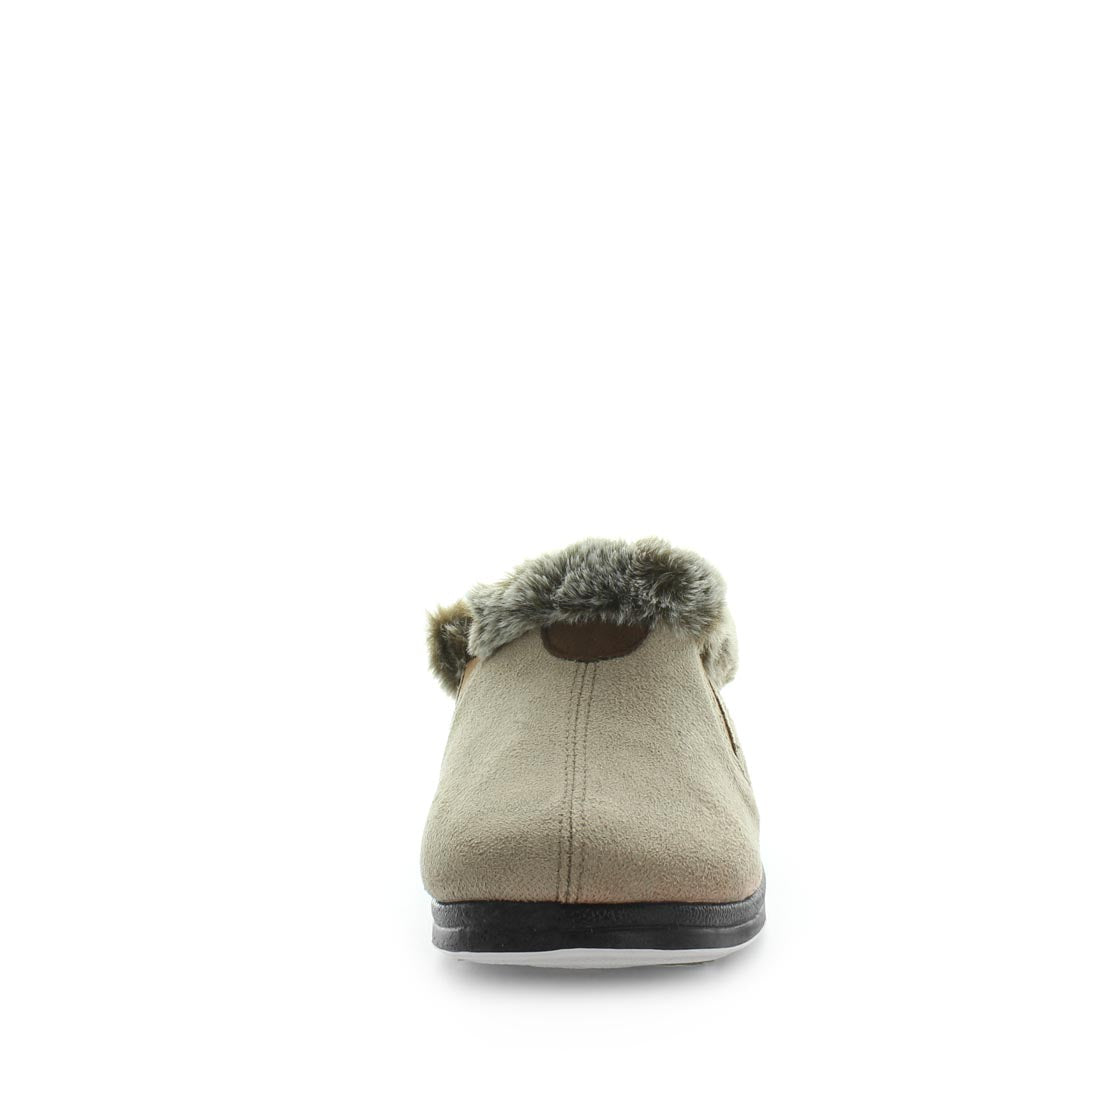 Elivia by panda slippers - comfort slippers - women's slippers - boot style slippers - slipper boots - fur collar and fur lining slipper with warm and comfy fit and twin gussets for easy slip on and off